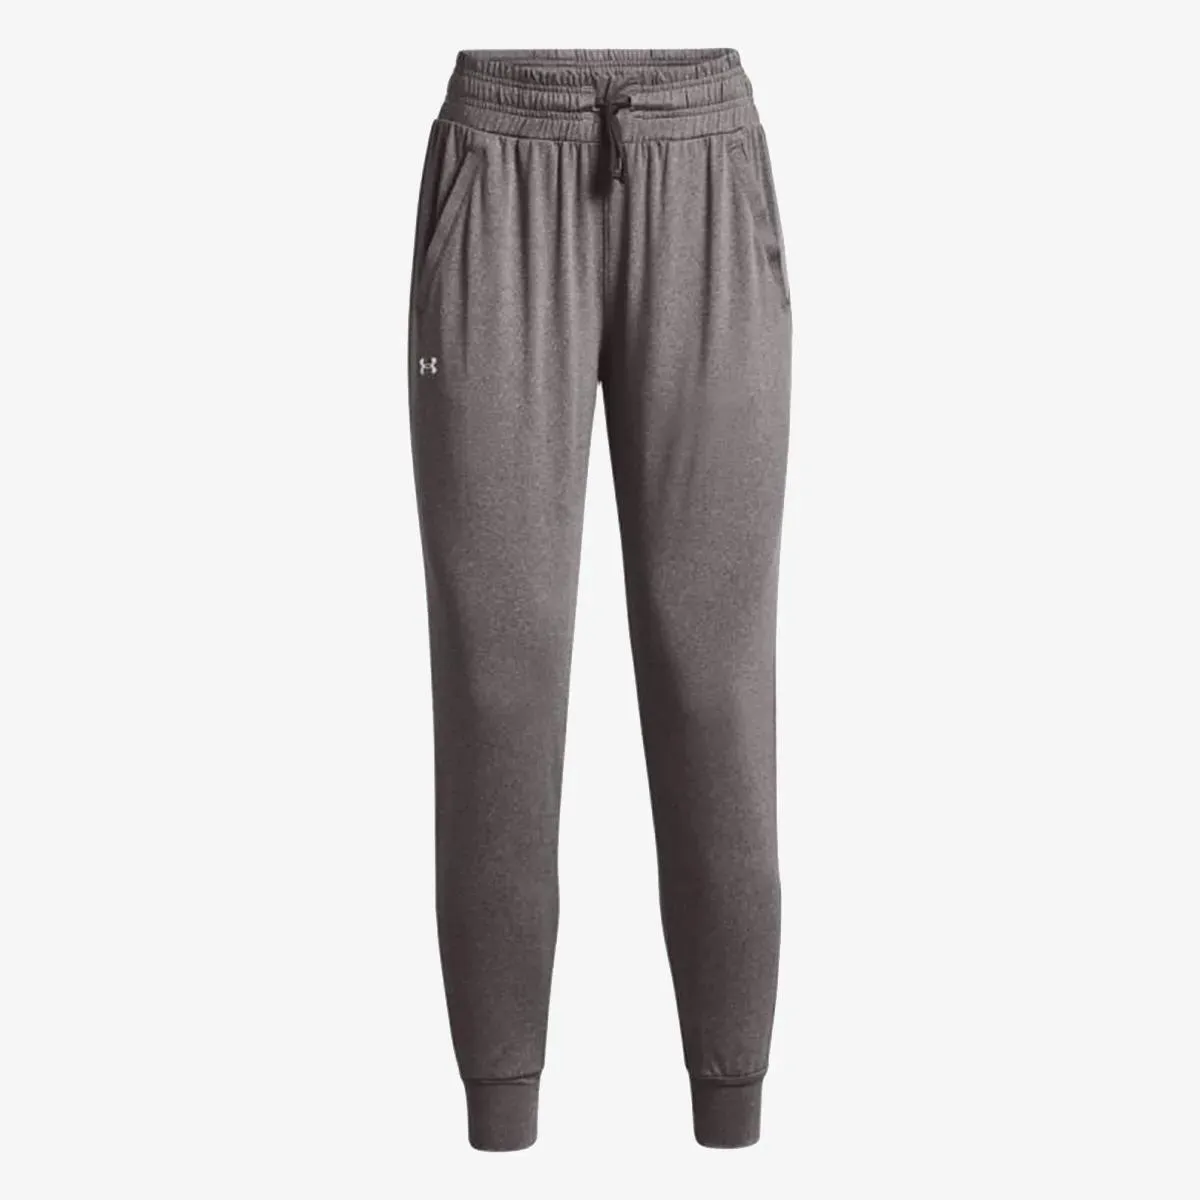 Under Armour NEW FABRIC HG ARMOUR PANT 1 